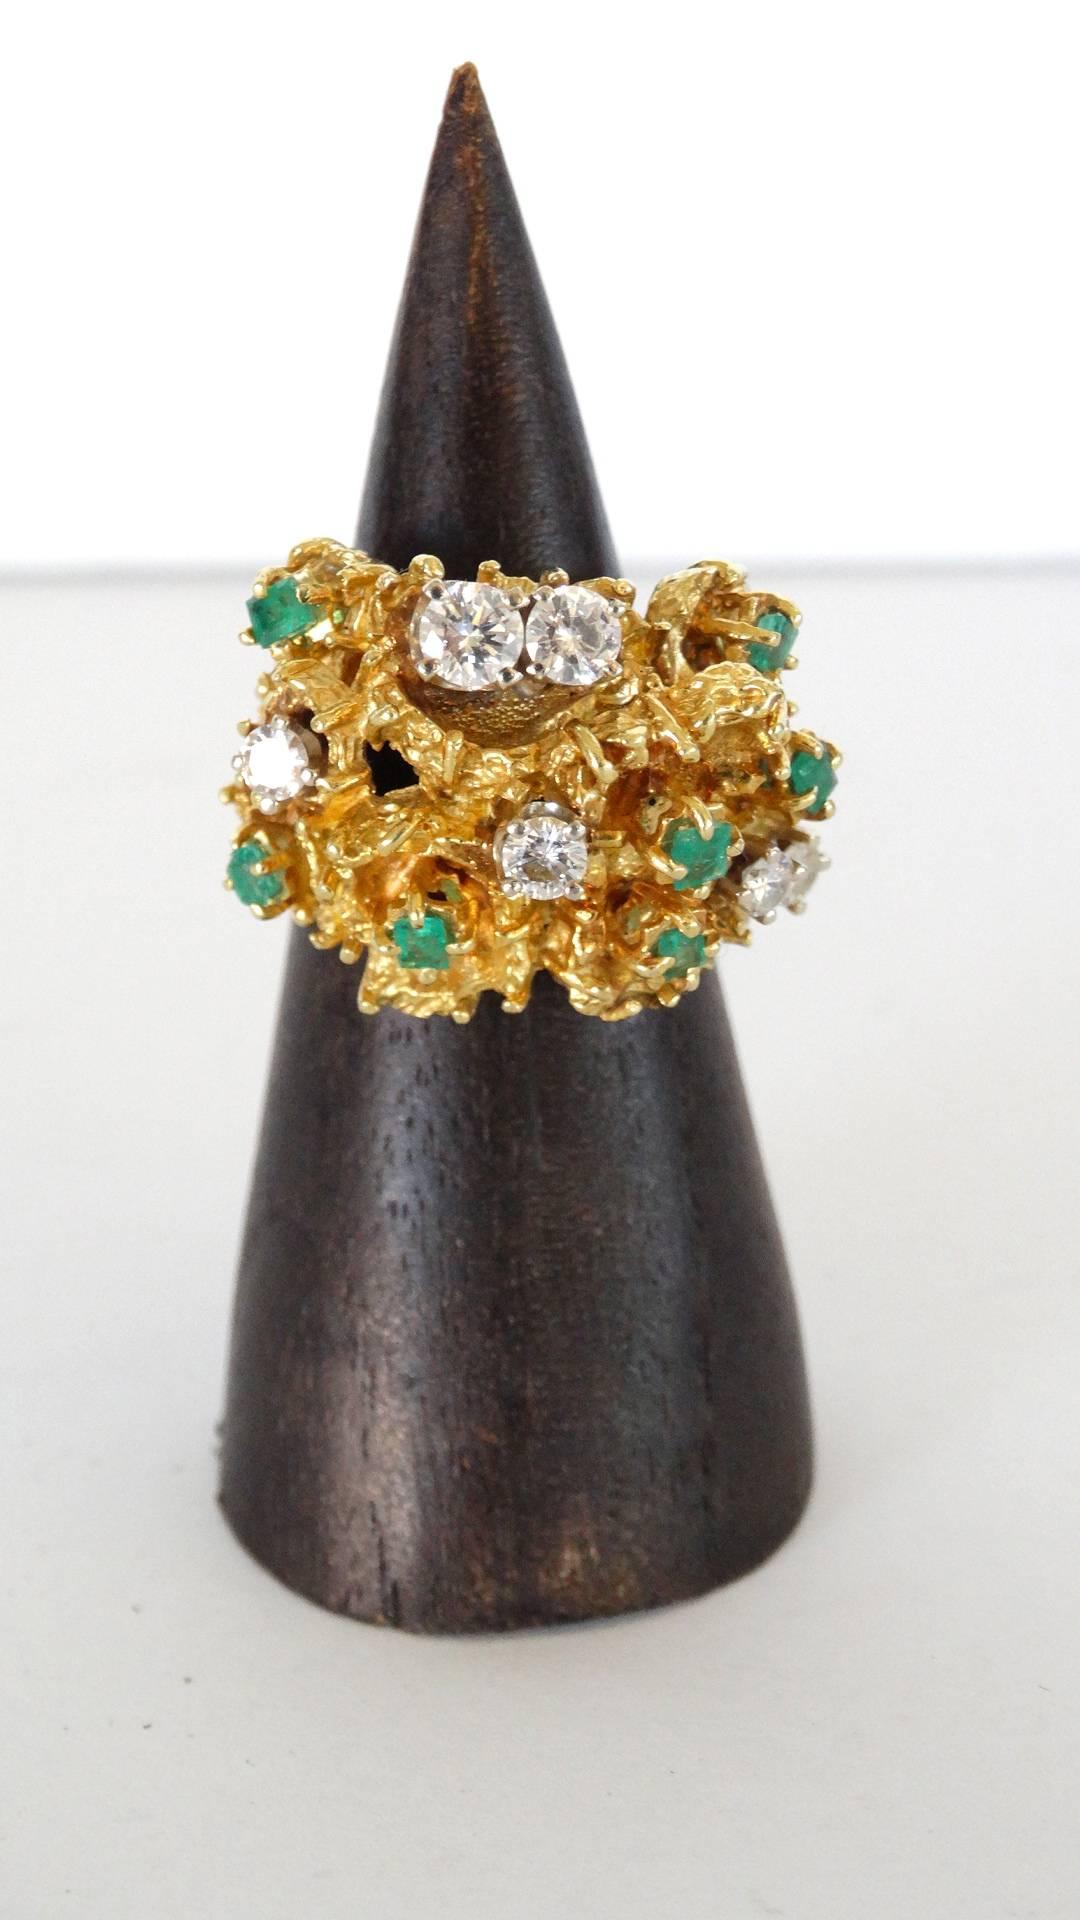 A beautifully designed 18 karat gold nugget ring with 6 white diamonds totaling to 1.2 carat and 6 emeralds totaling to 0.50 carat. This lovely cocktail rings weighs 20.98 grams. Size 6.5 DM if you have any further questions 